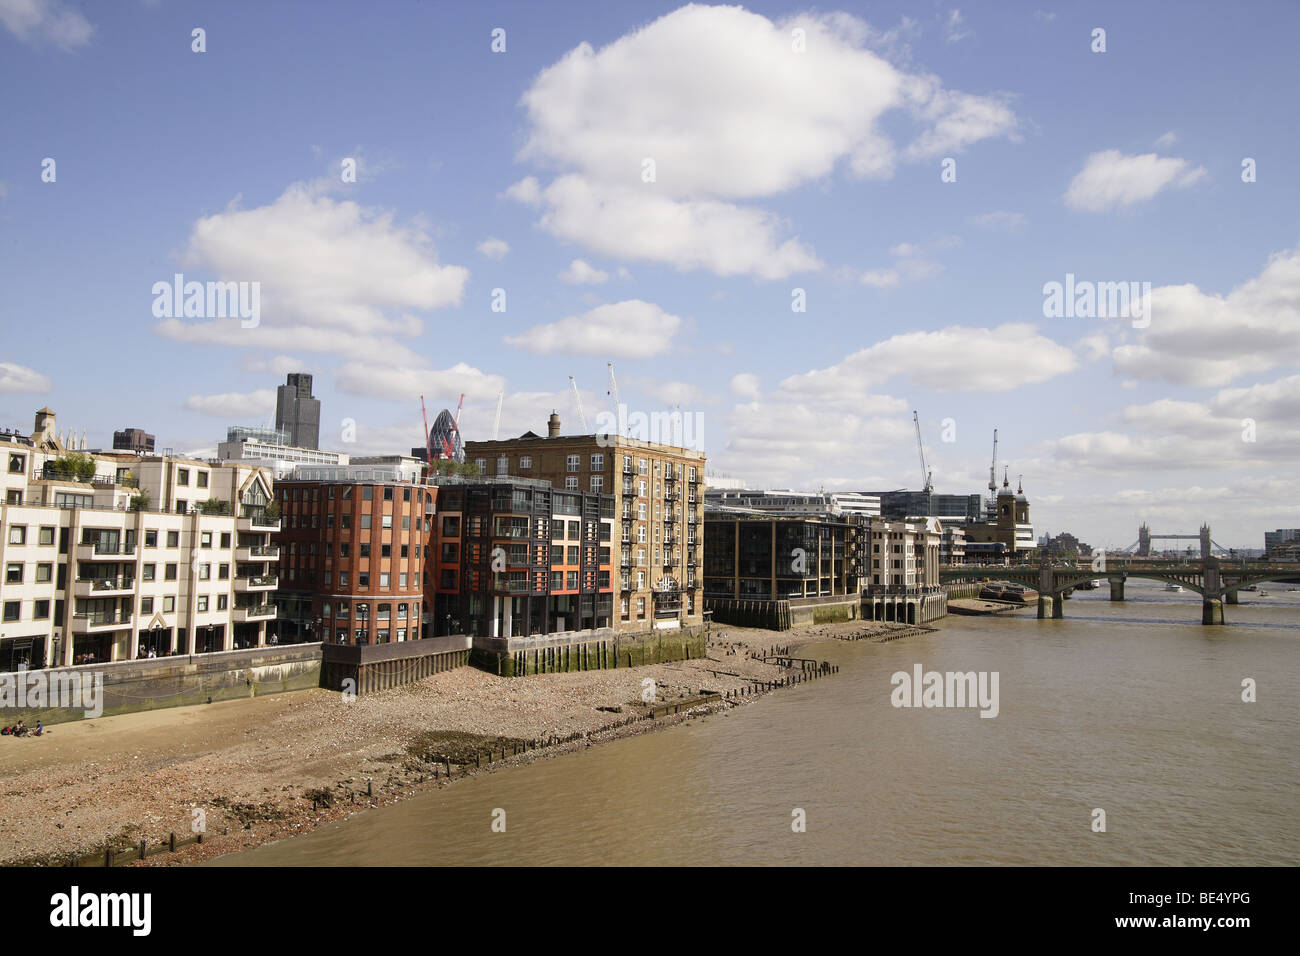 River thames people enjoying low tide sand bankside in the summer.Tourism londoners city life recreation southbank preservation Stock Photo